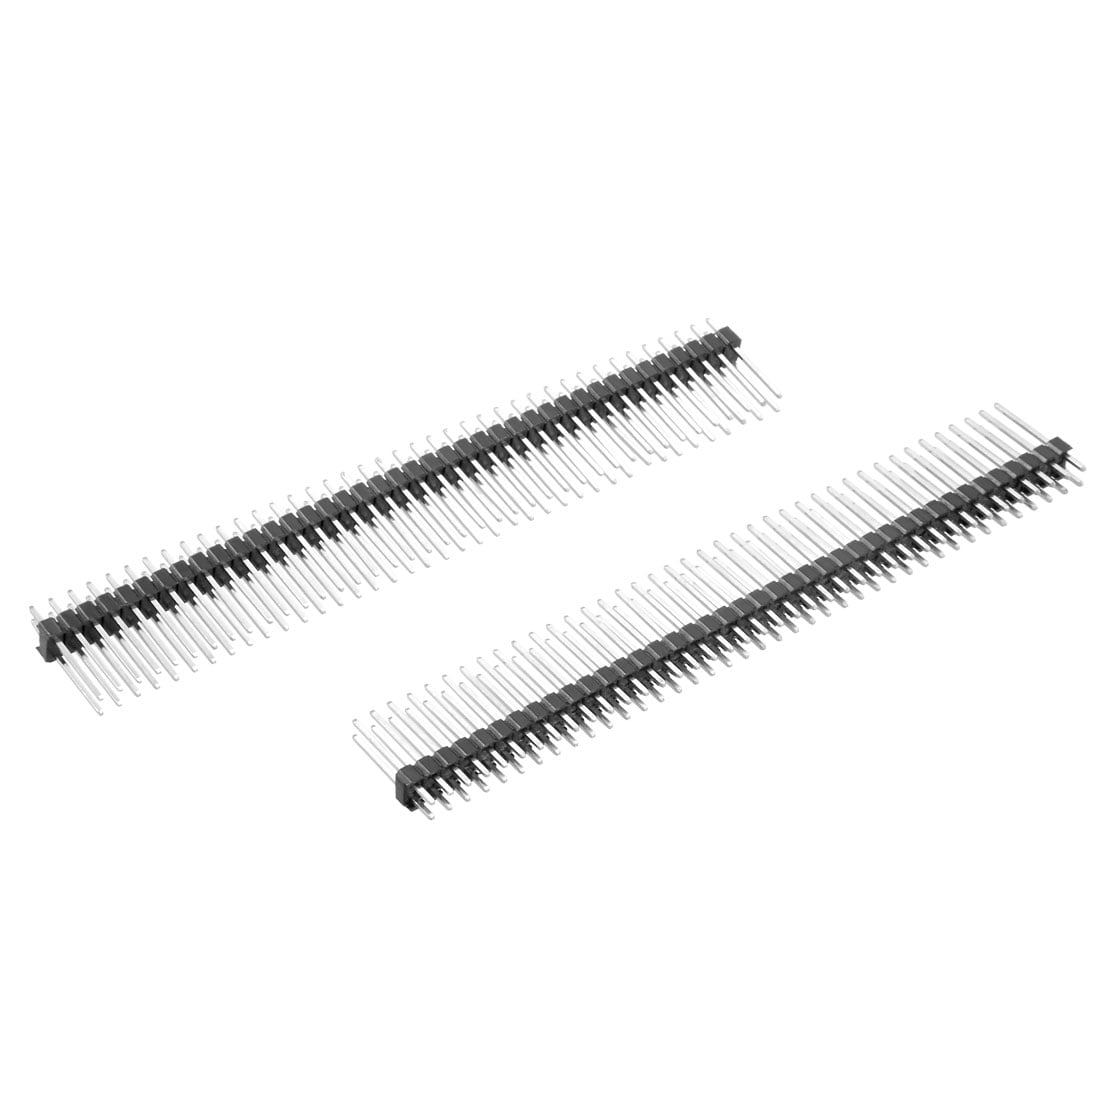 10PCS 2.54mm 2 x 40 Pin Male Double Row Right Angle Pin Header Strip 